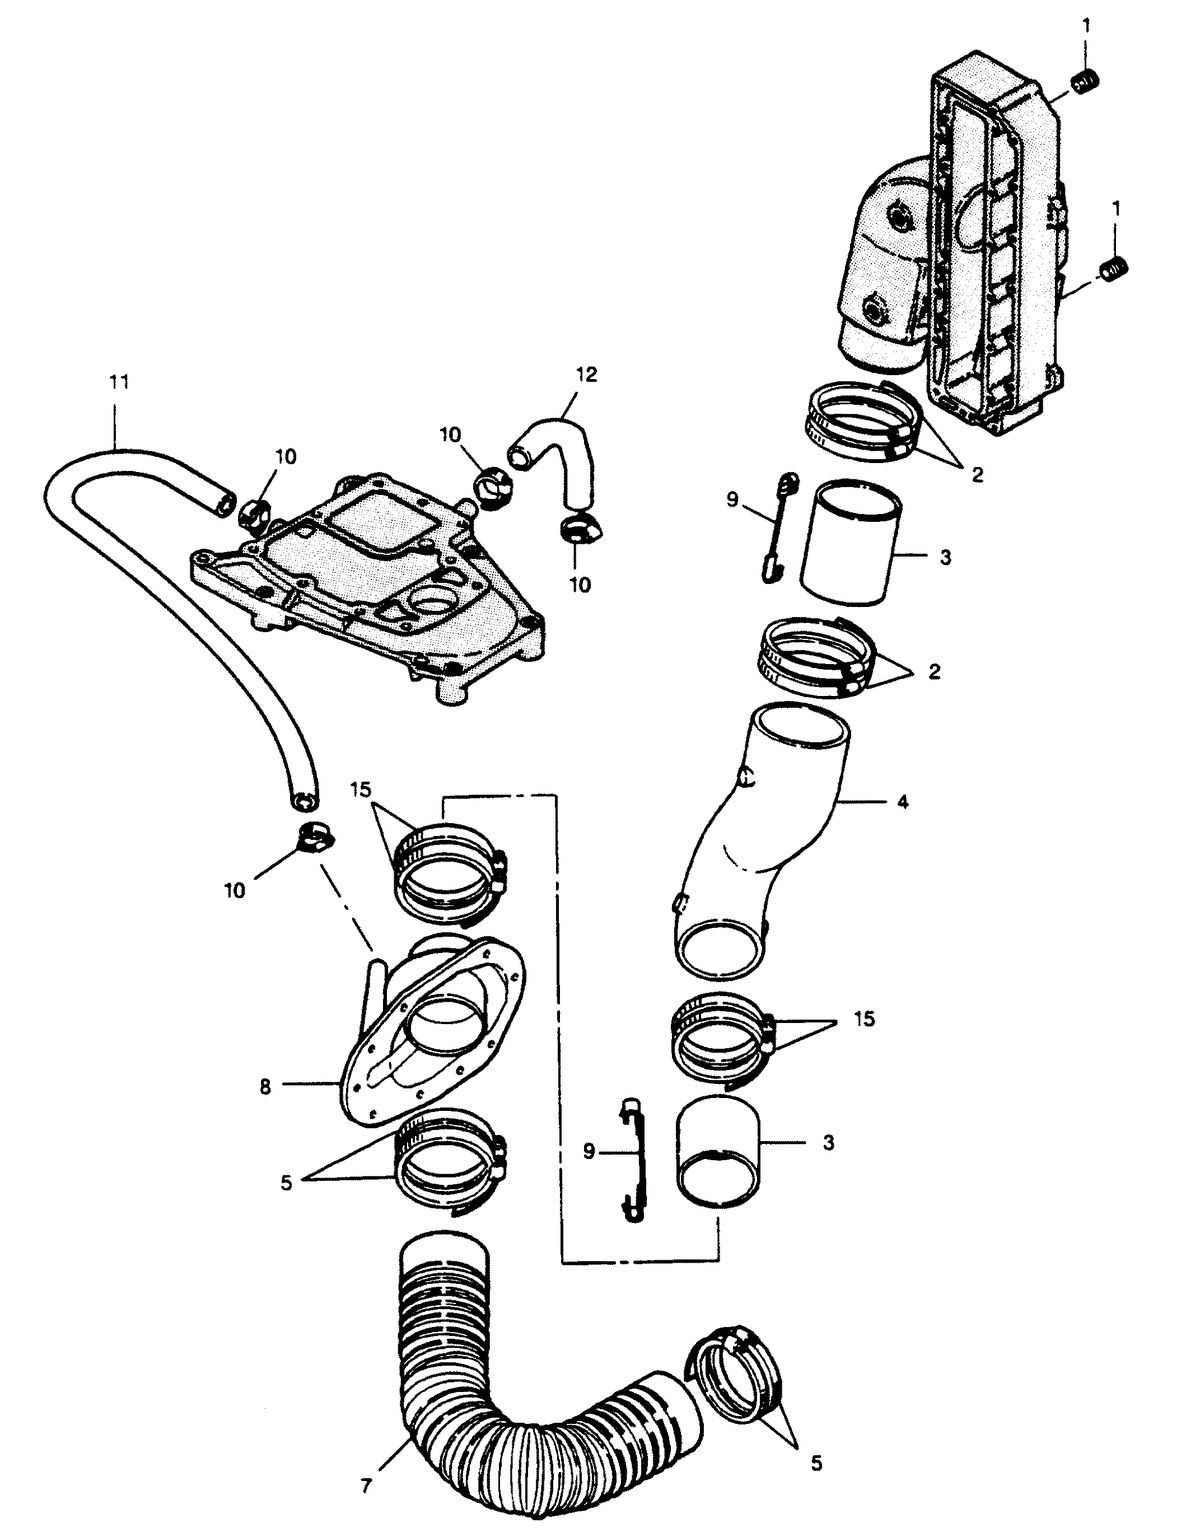 FORCE FORCE 1990 90 H.P. "C" MODEL L-DRIVE EXHAUST SYSTEM